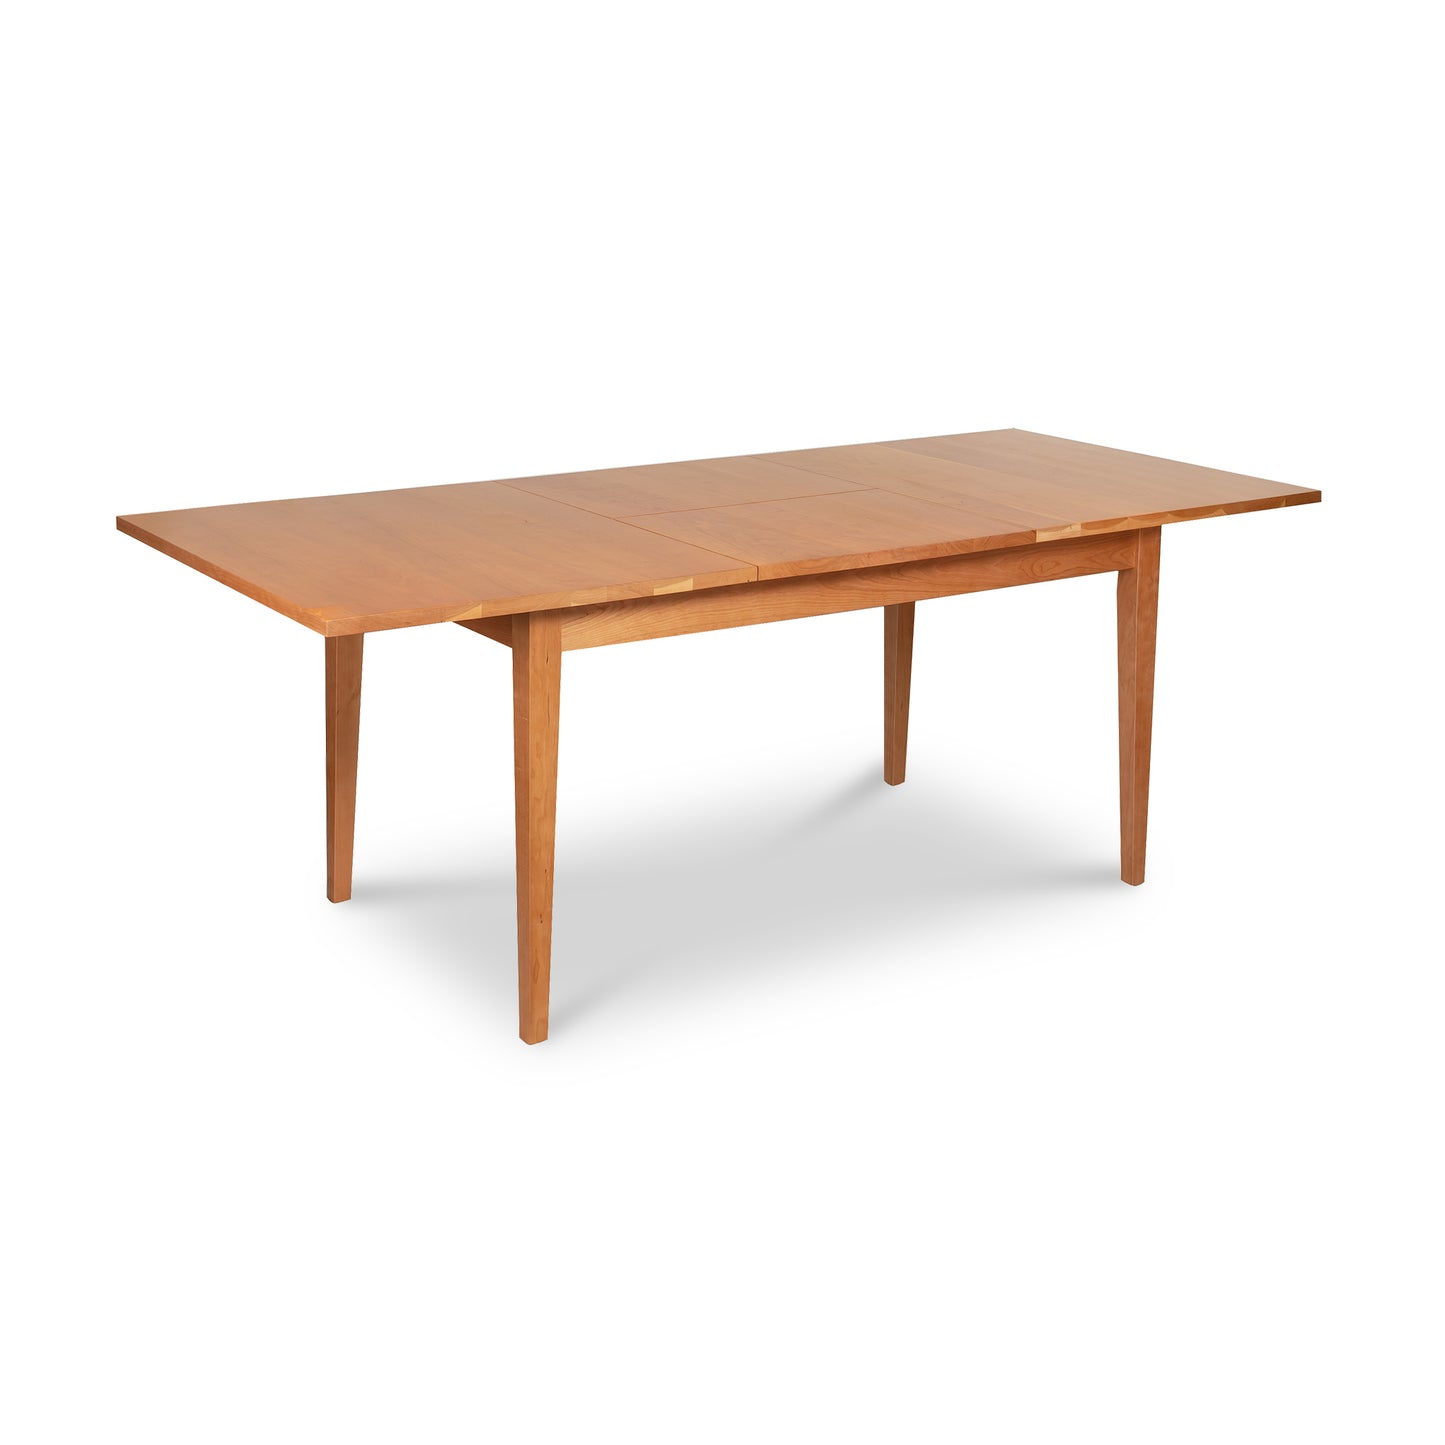 A Classic Shaker Butterfly Extension Table made of hardwood by Lyndon Furniture.